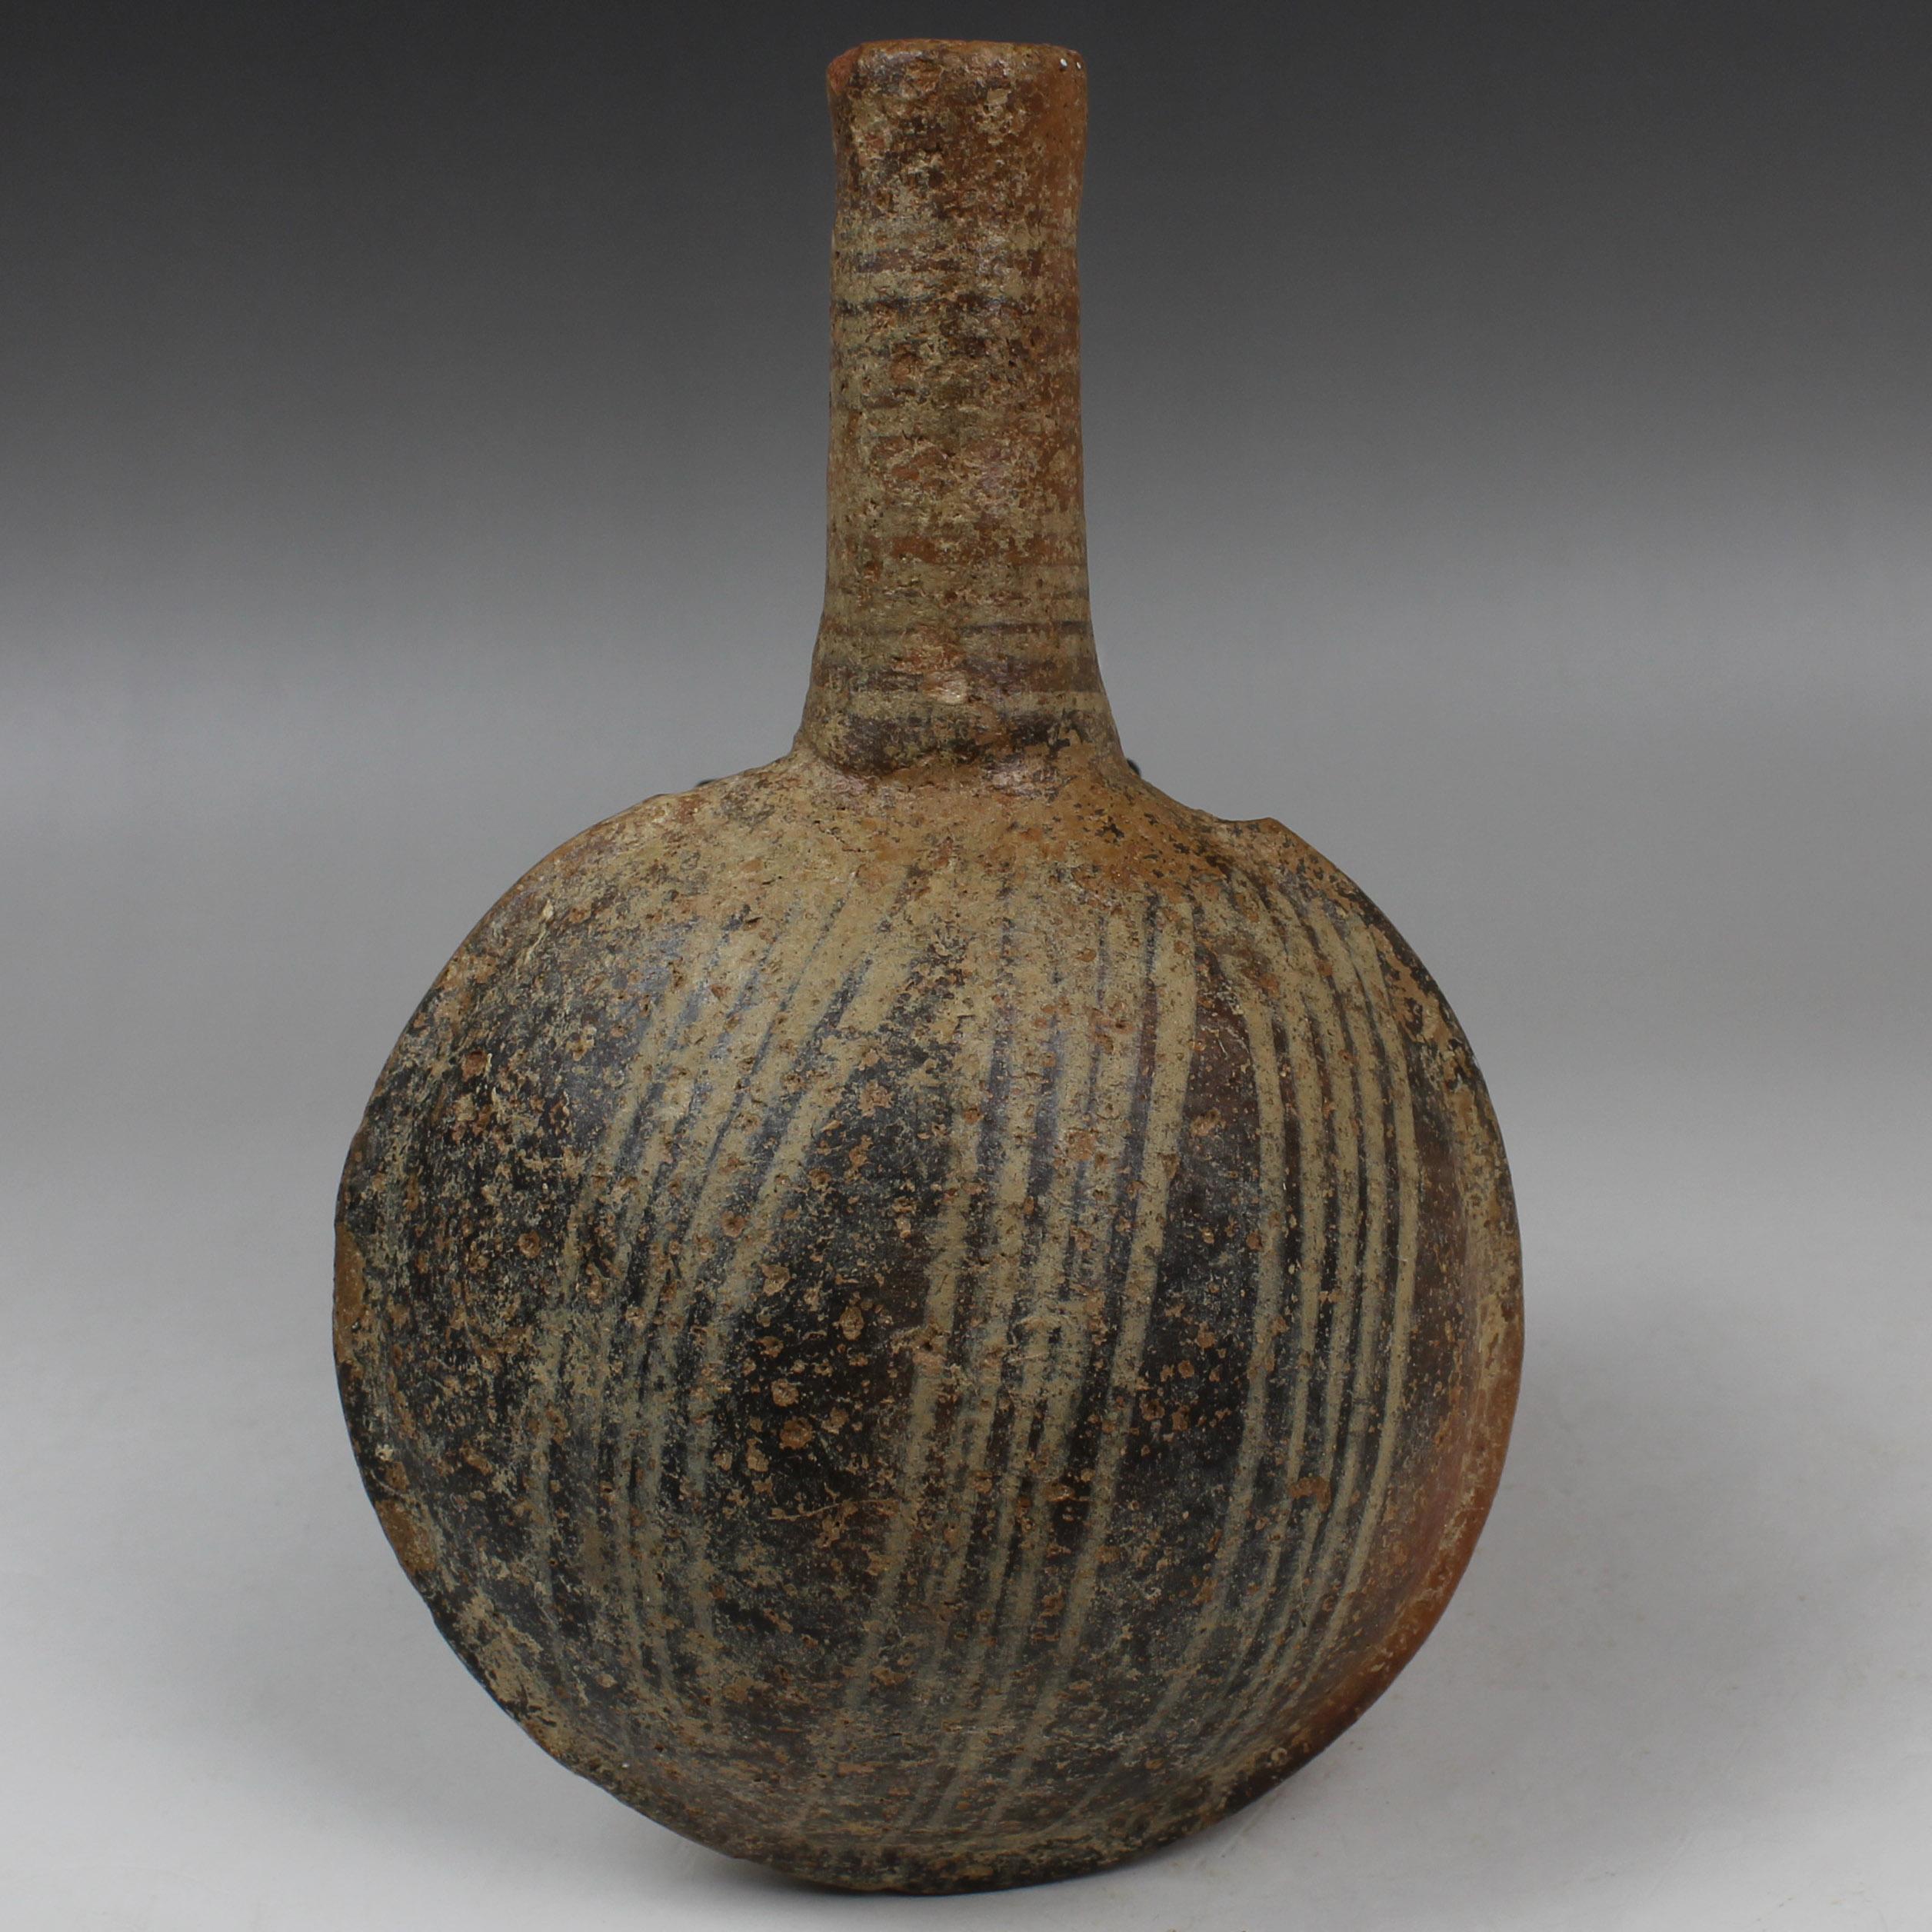 ITEM: Flask
MATERIAL: Pottery
CULTURE: Bronze Age, Cypriot
PERIOD: 1450 – 1050 B.C
DIMENSIONS: 230 mm x 132 mm
CONDITION: Good condition
PROVENANCE: Ex Emeritus collection (USA), collected from the 1950’s to the 1980’s by a distinguished university